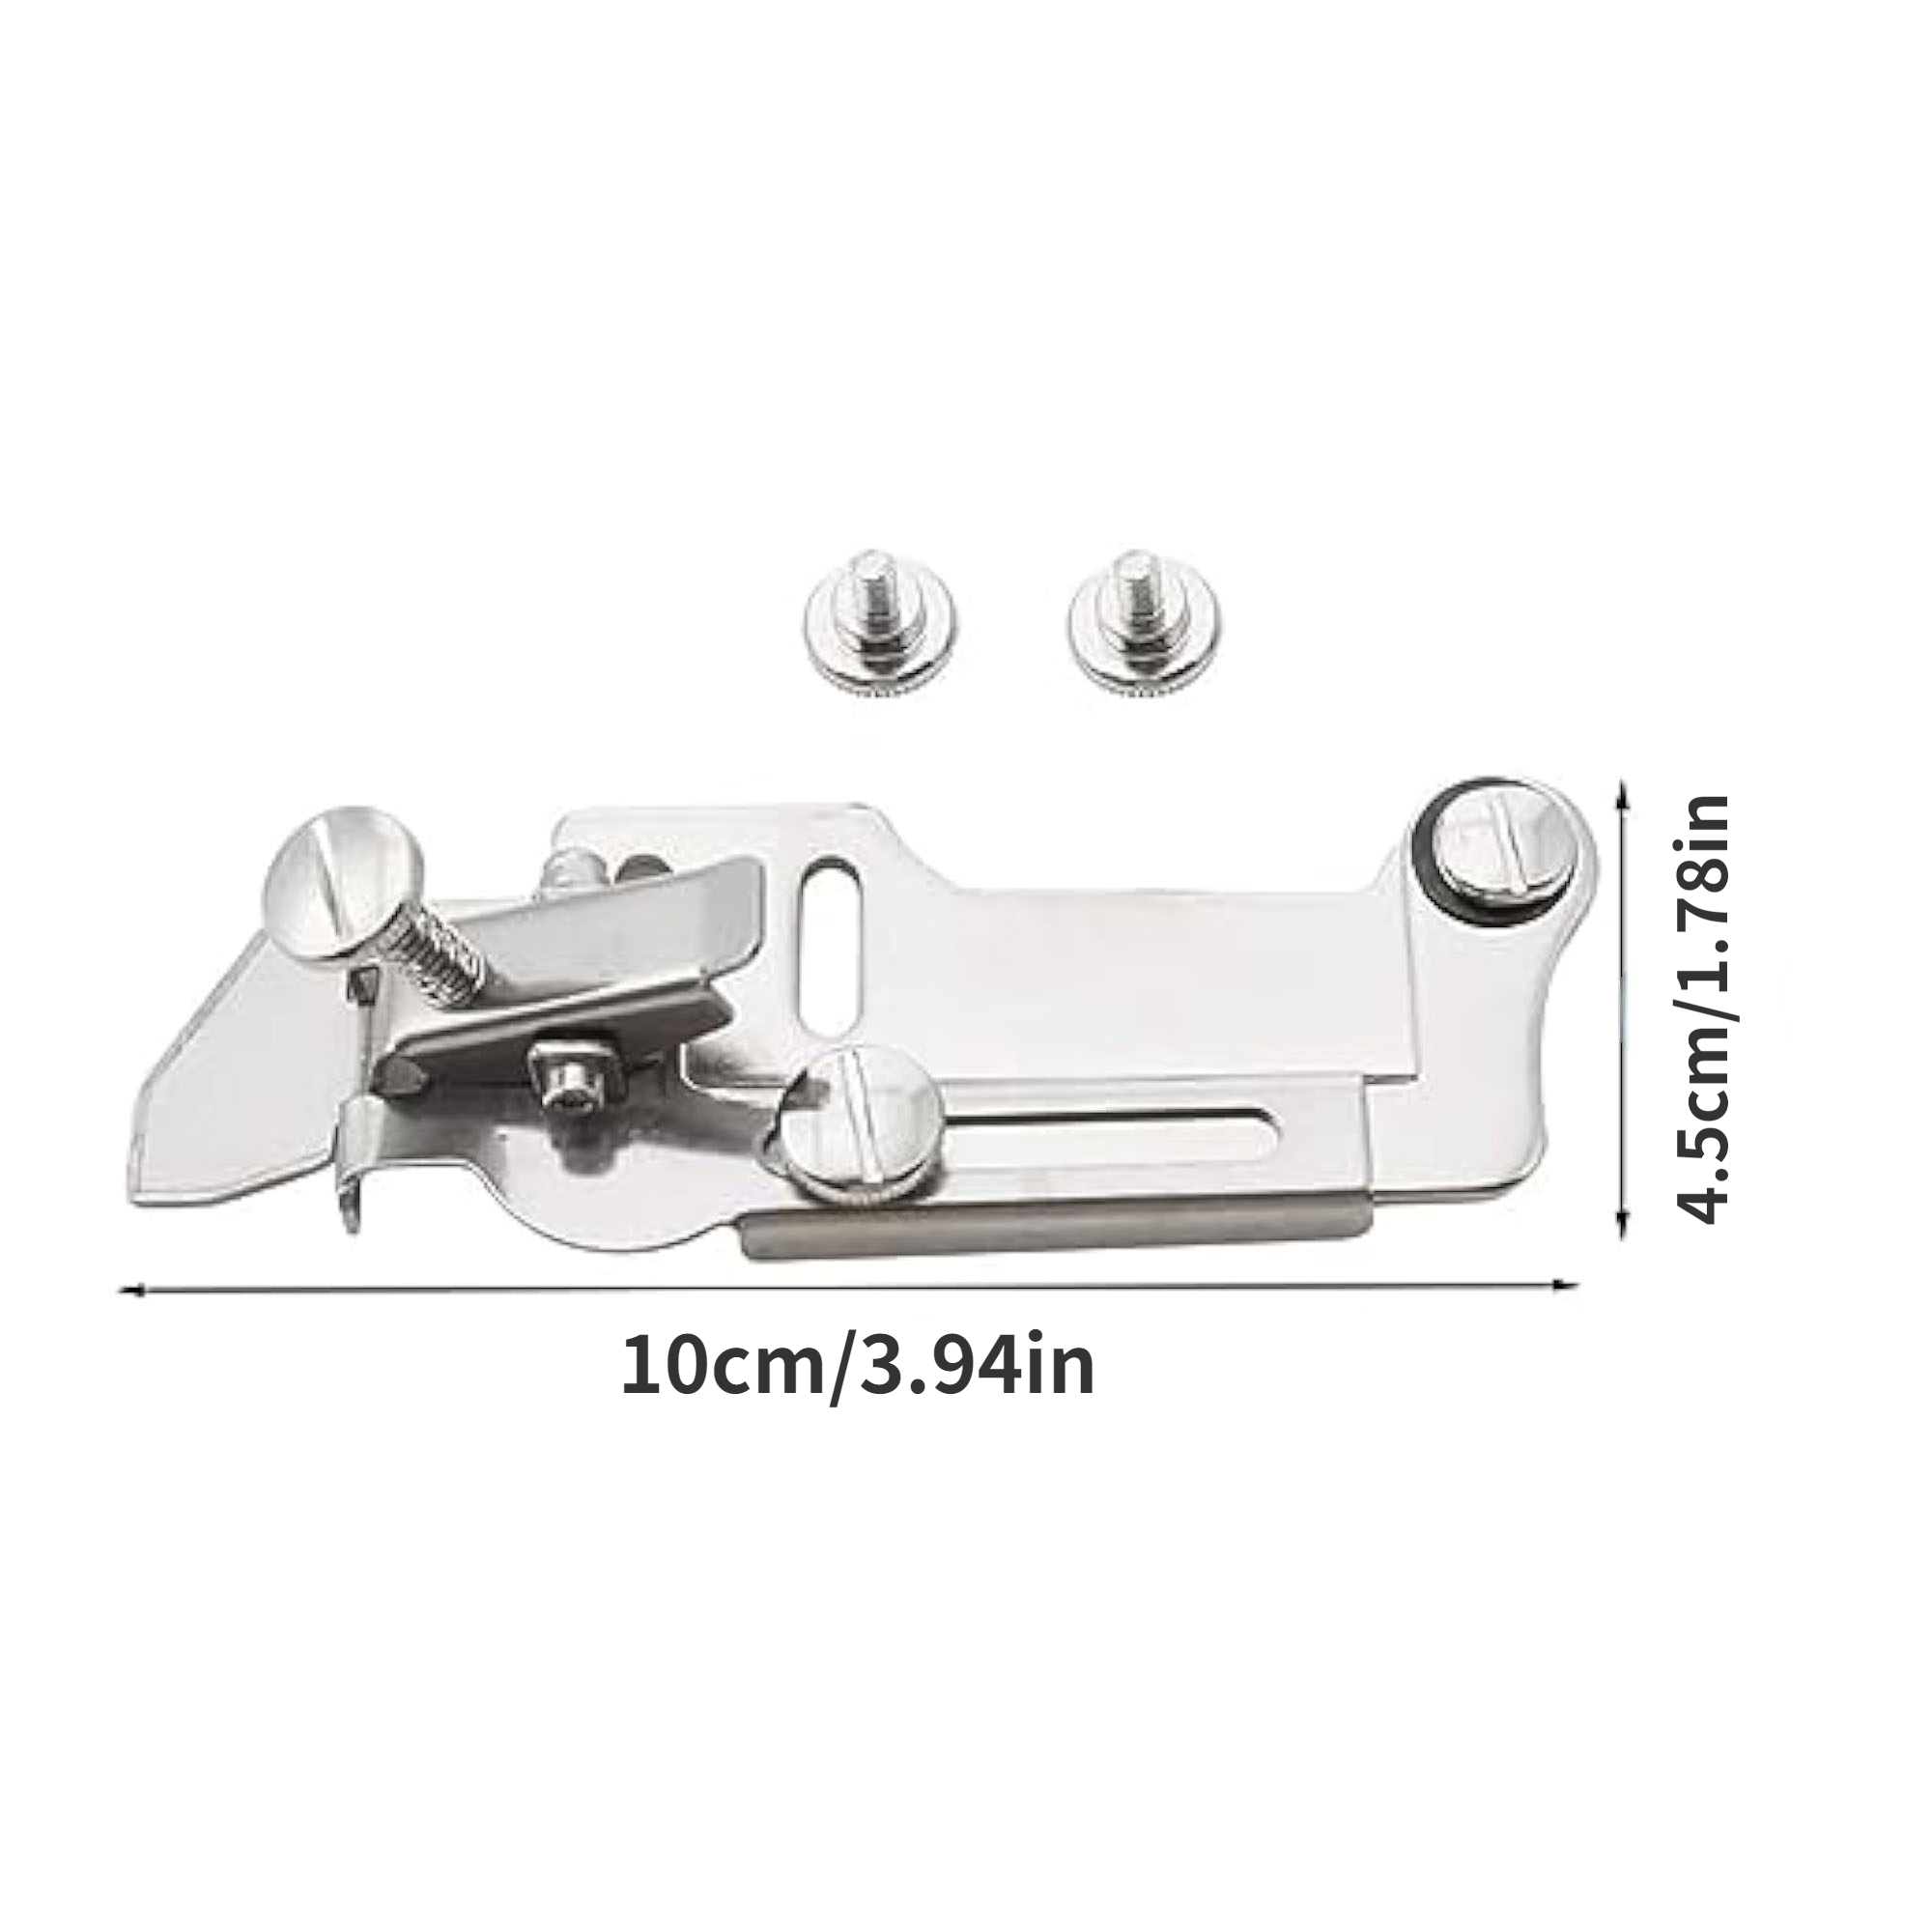 Magnetic Seam Guide with Clip Multifucntional Magnetic Seam Guide Hemmer Guide Seam Guide Hem Guide for Industrial or Walking Foot Sewing Machine